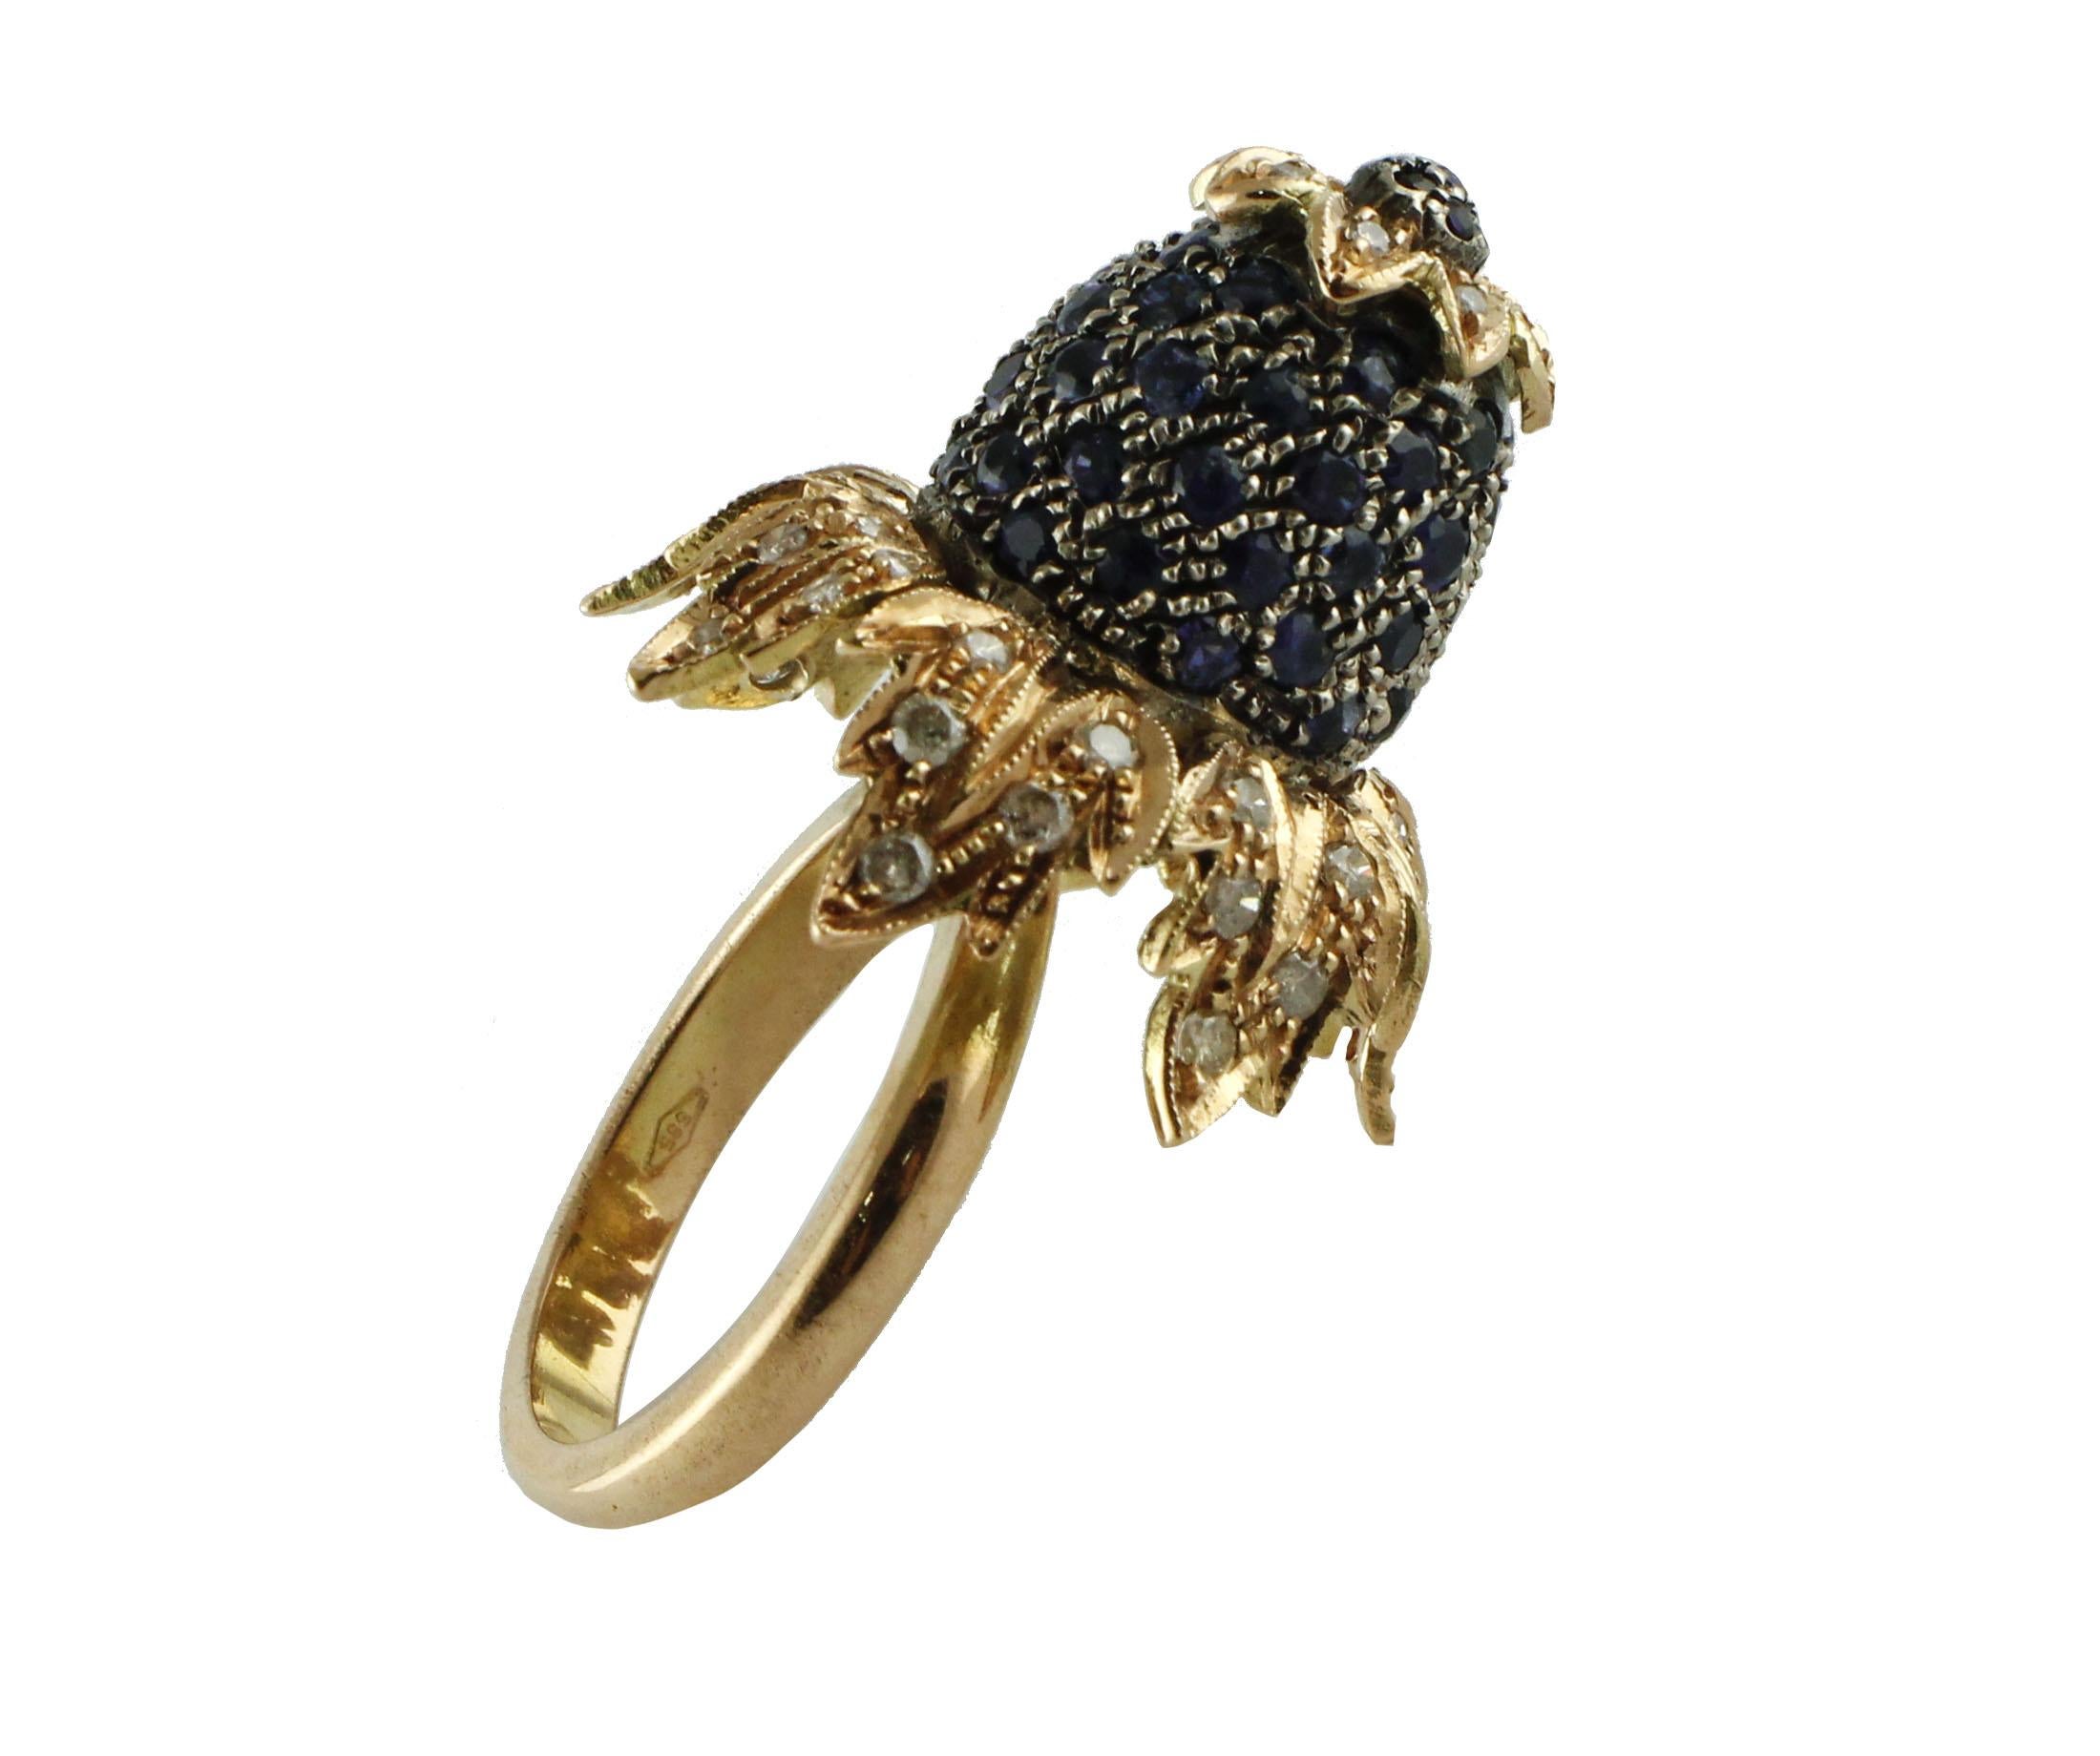 A particular flower shape is mounted in 14Kt gold with details in silver, the leaves are adorned of diamond and the flower's center (2.3 cm) is a high dome of blue sapphires 3.55 ct
Ring Size: US 7 - ITA 14,5 - French 54,5 - UK O
Diamonds 0.93